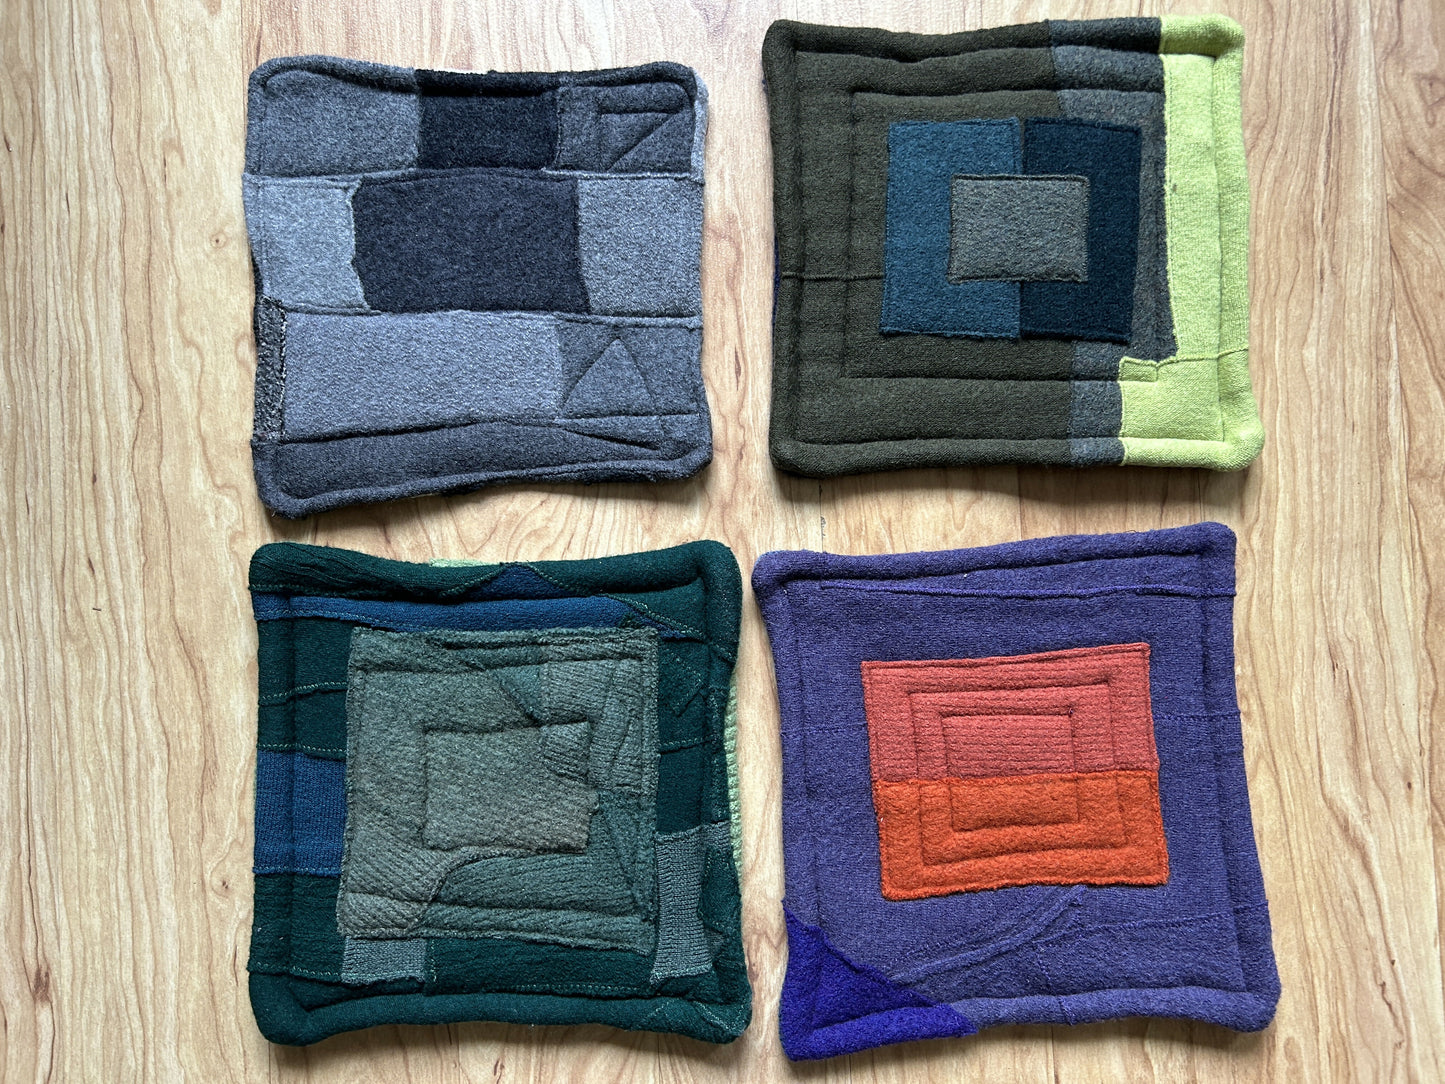 Upcycled Wool Trivet - Green one side, blues the other side